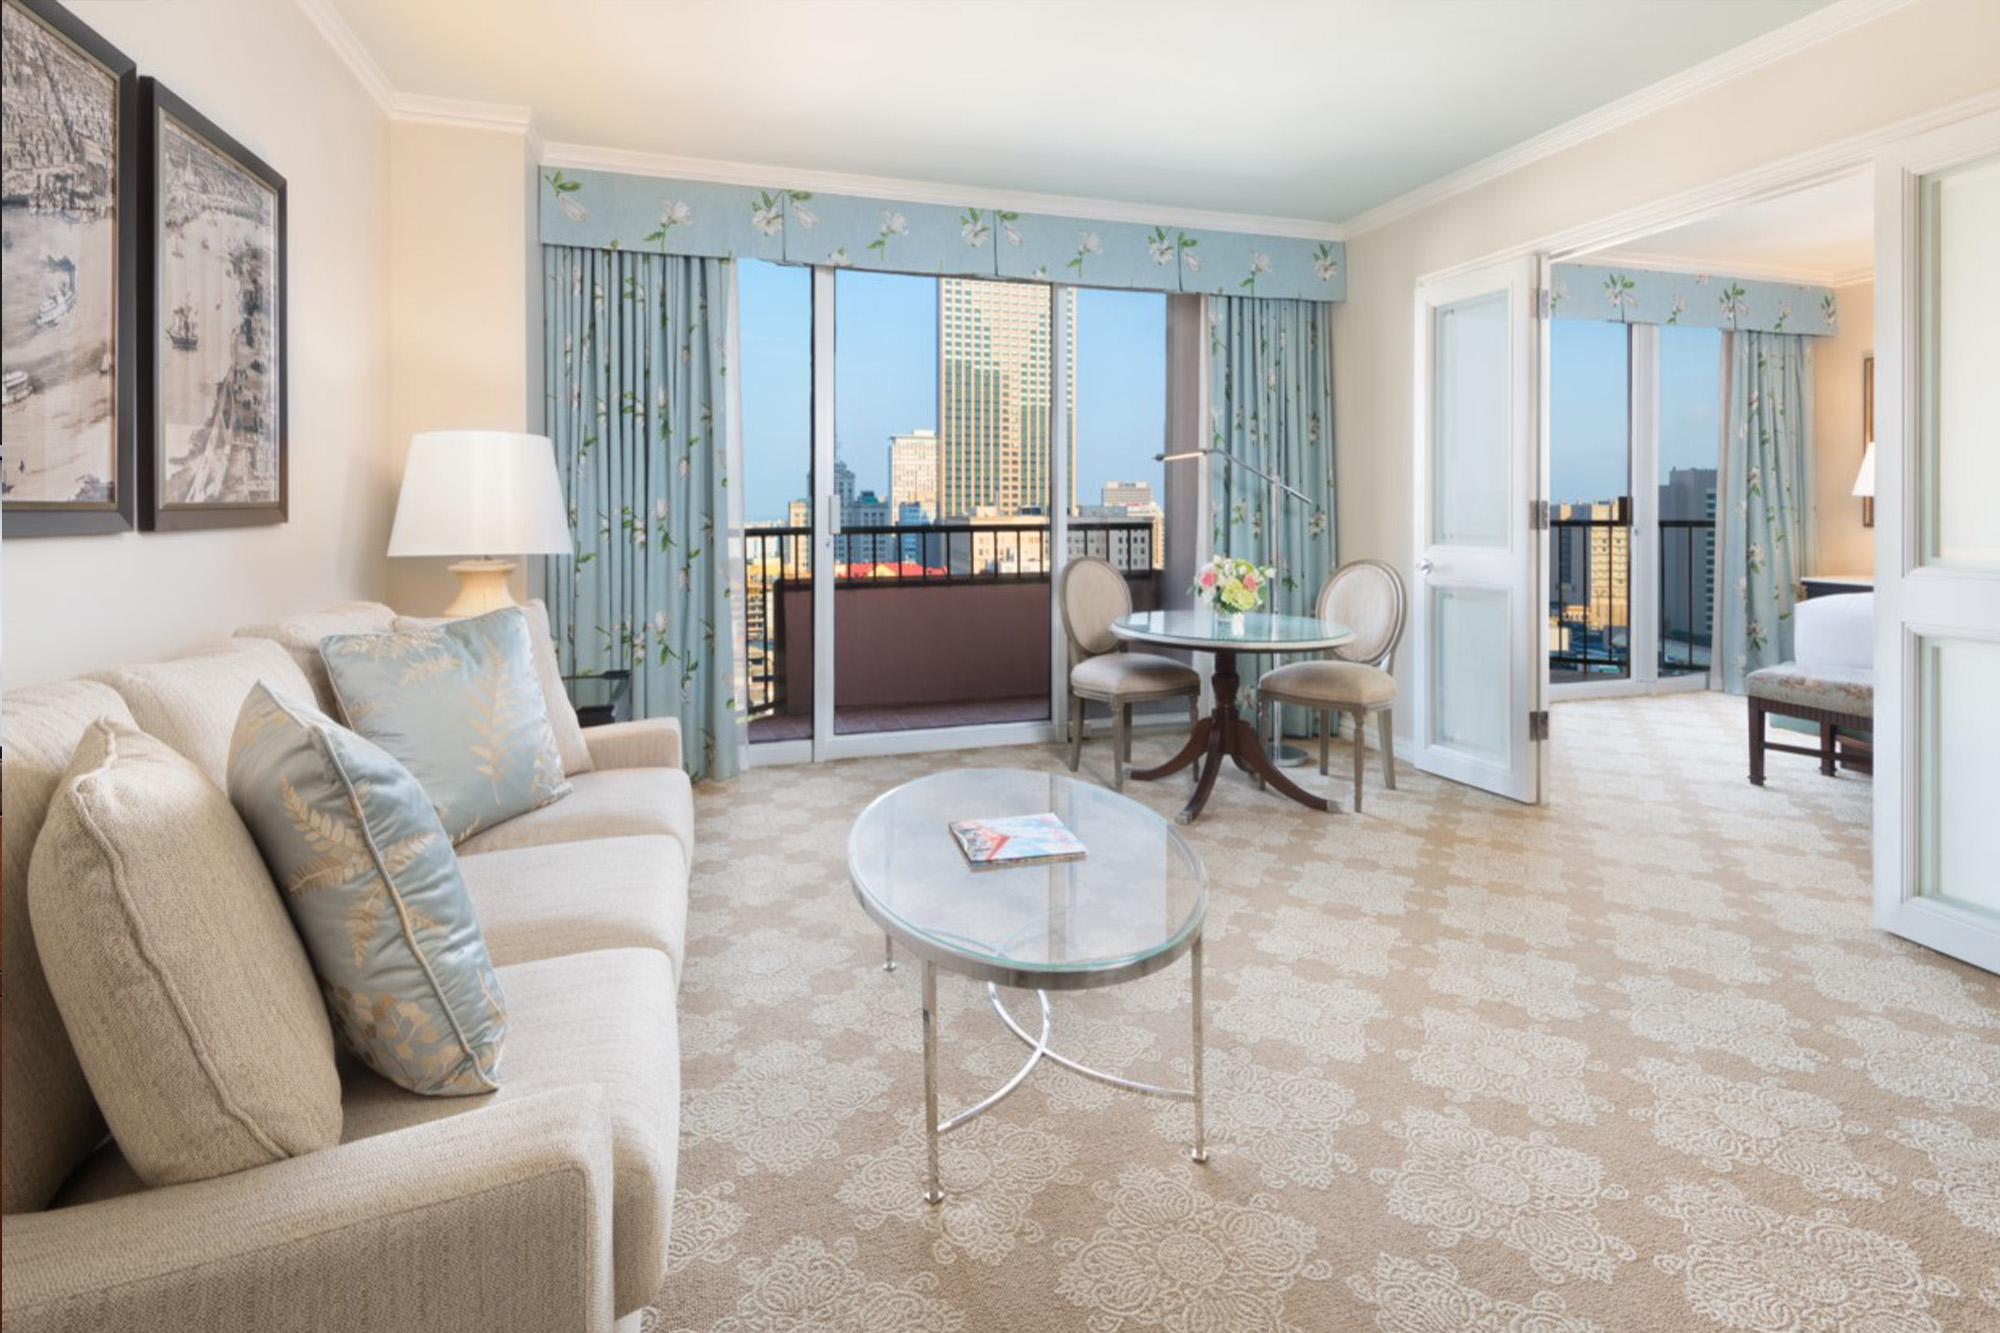 Luxury Deluxe Suite - The Windsor Court Hotel in New Orleans